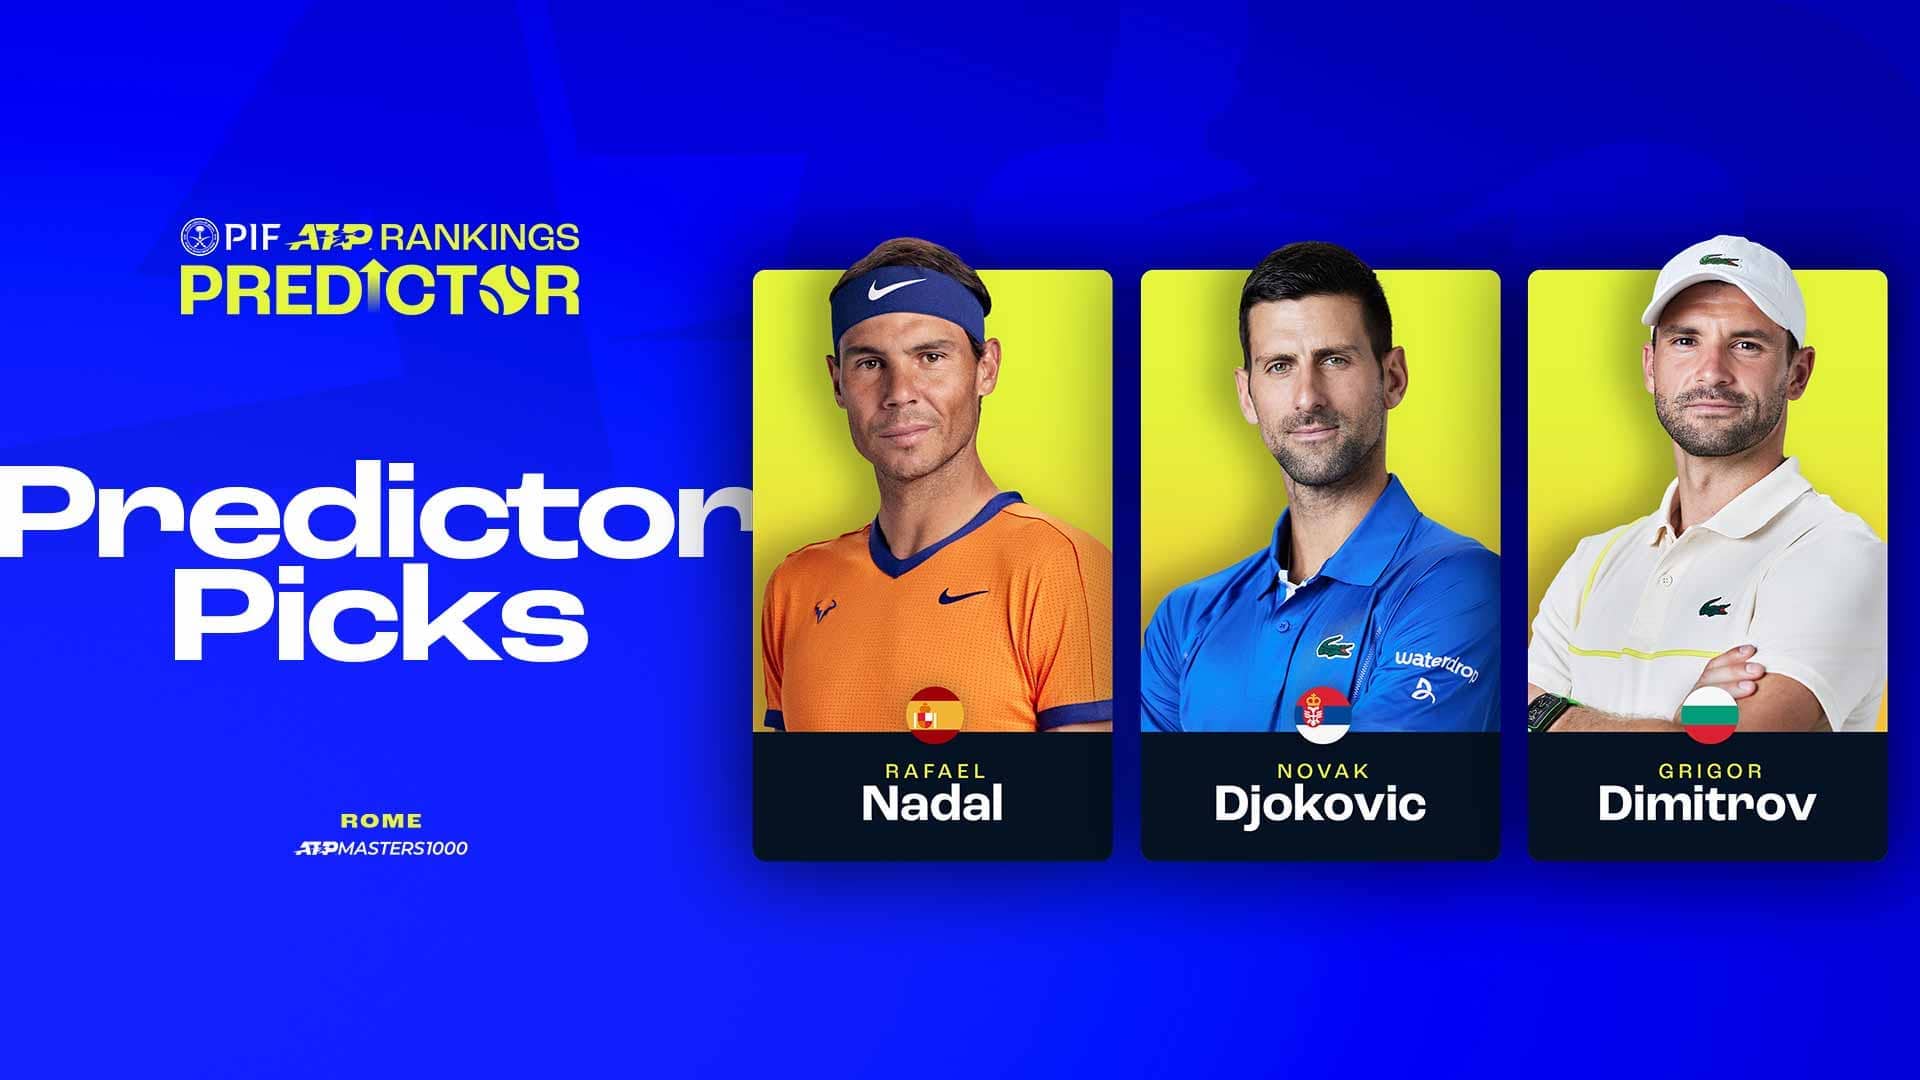 Predictor Picks: Why Nadal & Djokovic are perfect choices for Rome